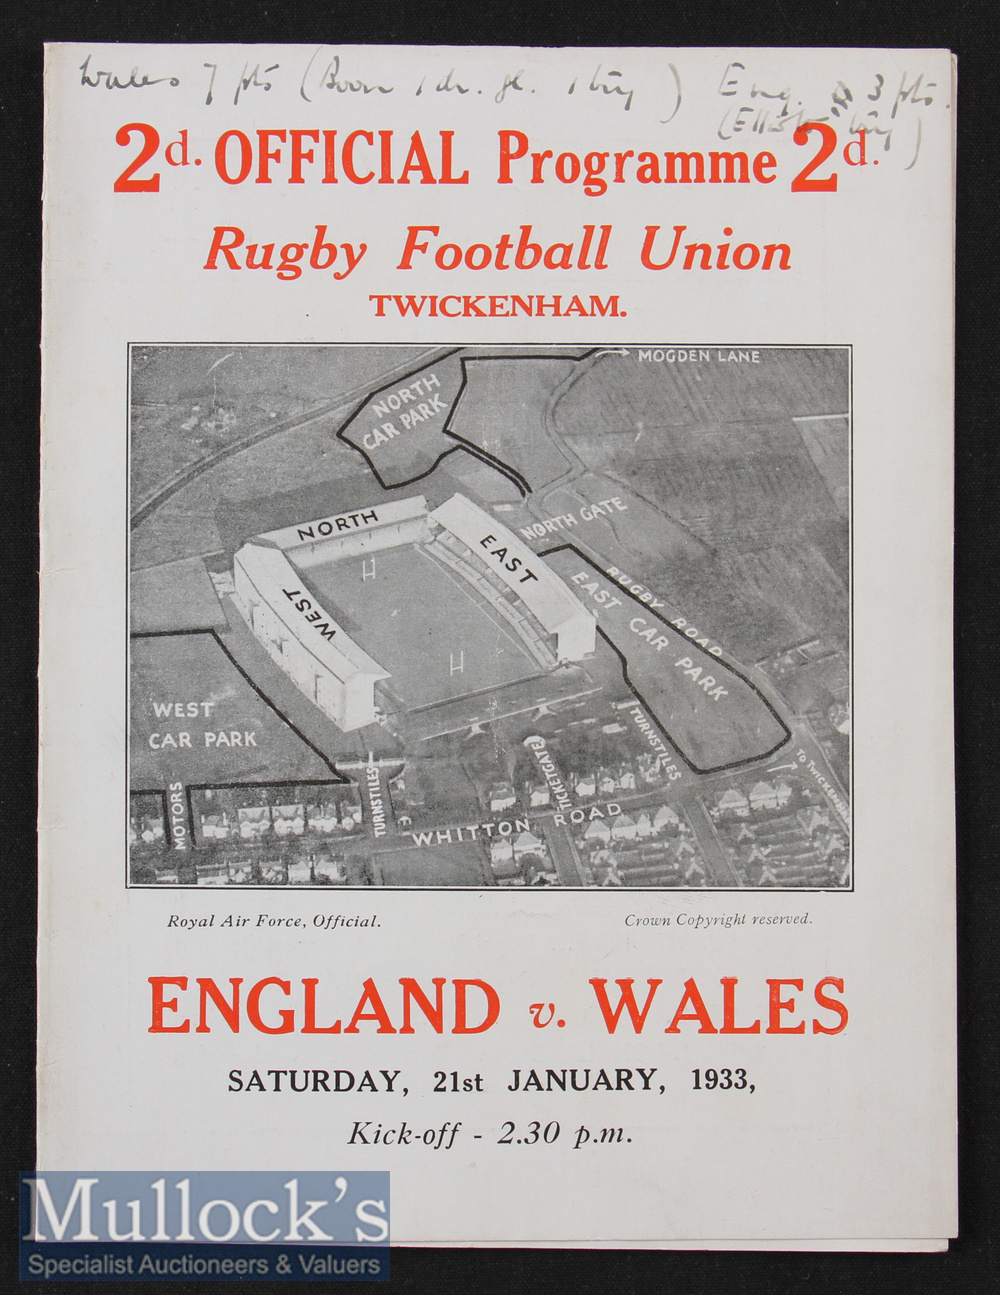 1933 England v Wales Rugby Programme: Famous first Welsh win at Twickenham^ 7-3. Score details